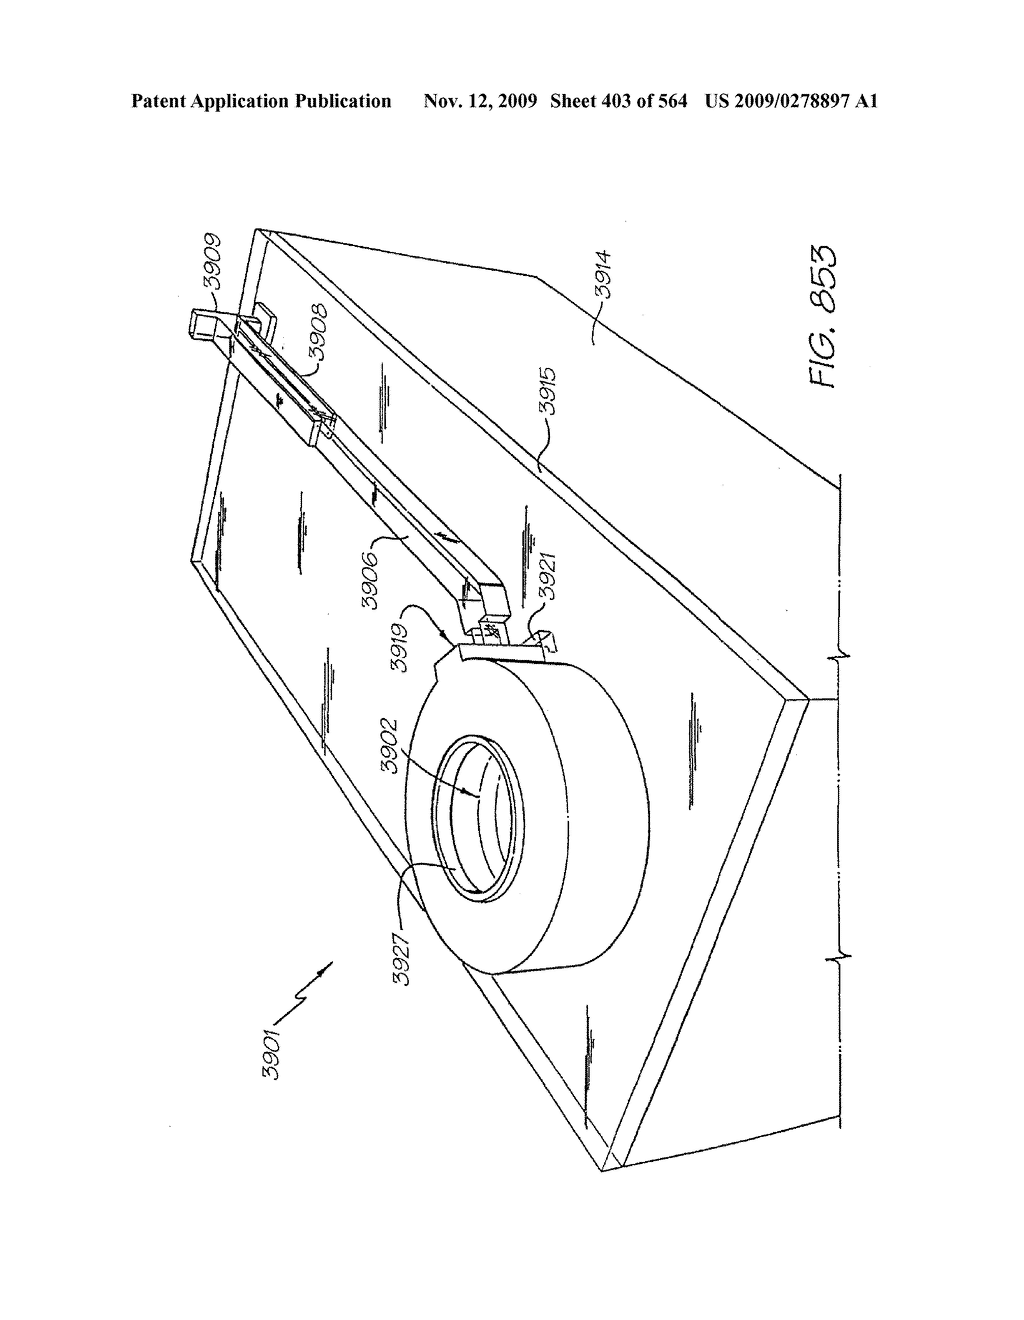 Inkjet Printhead With Nozzle Chambers Each Holding Two Fluids - diagram, schematic, and image 404